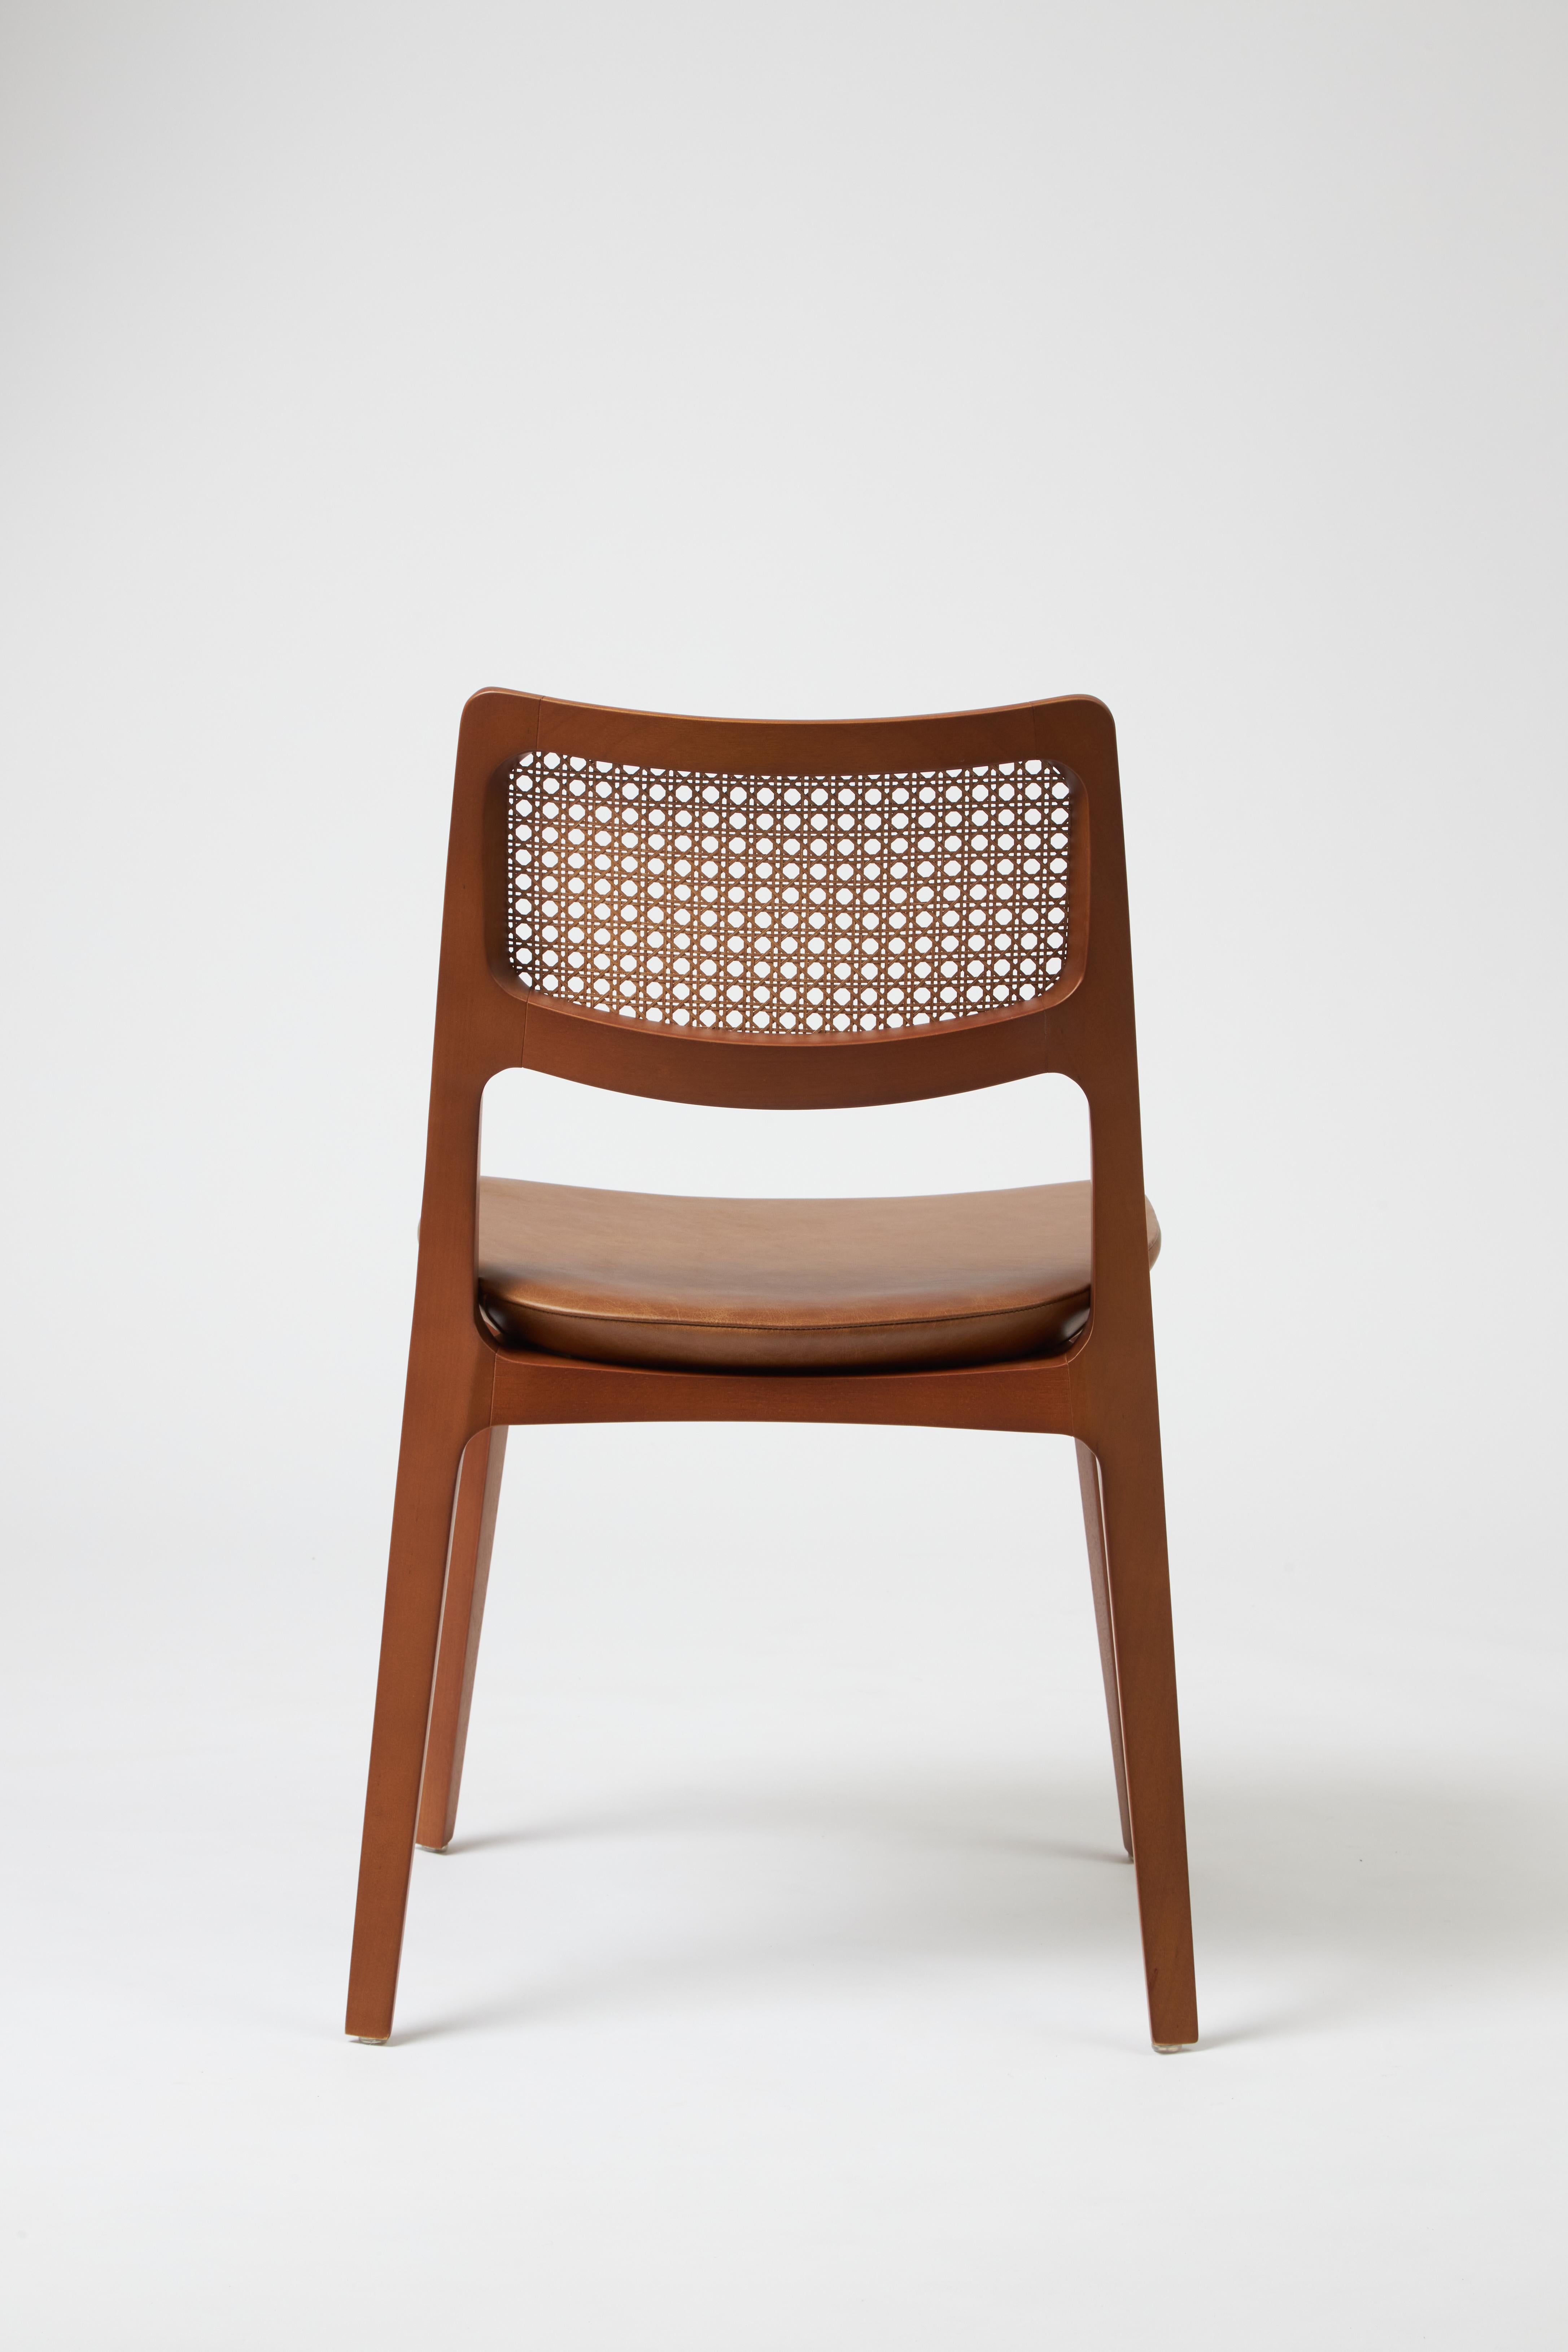 Caning Modern Style Aurora Chair Sculpted in Walnut Finish No Arms, leather seating For Sale